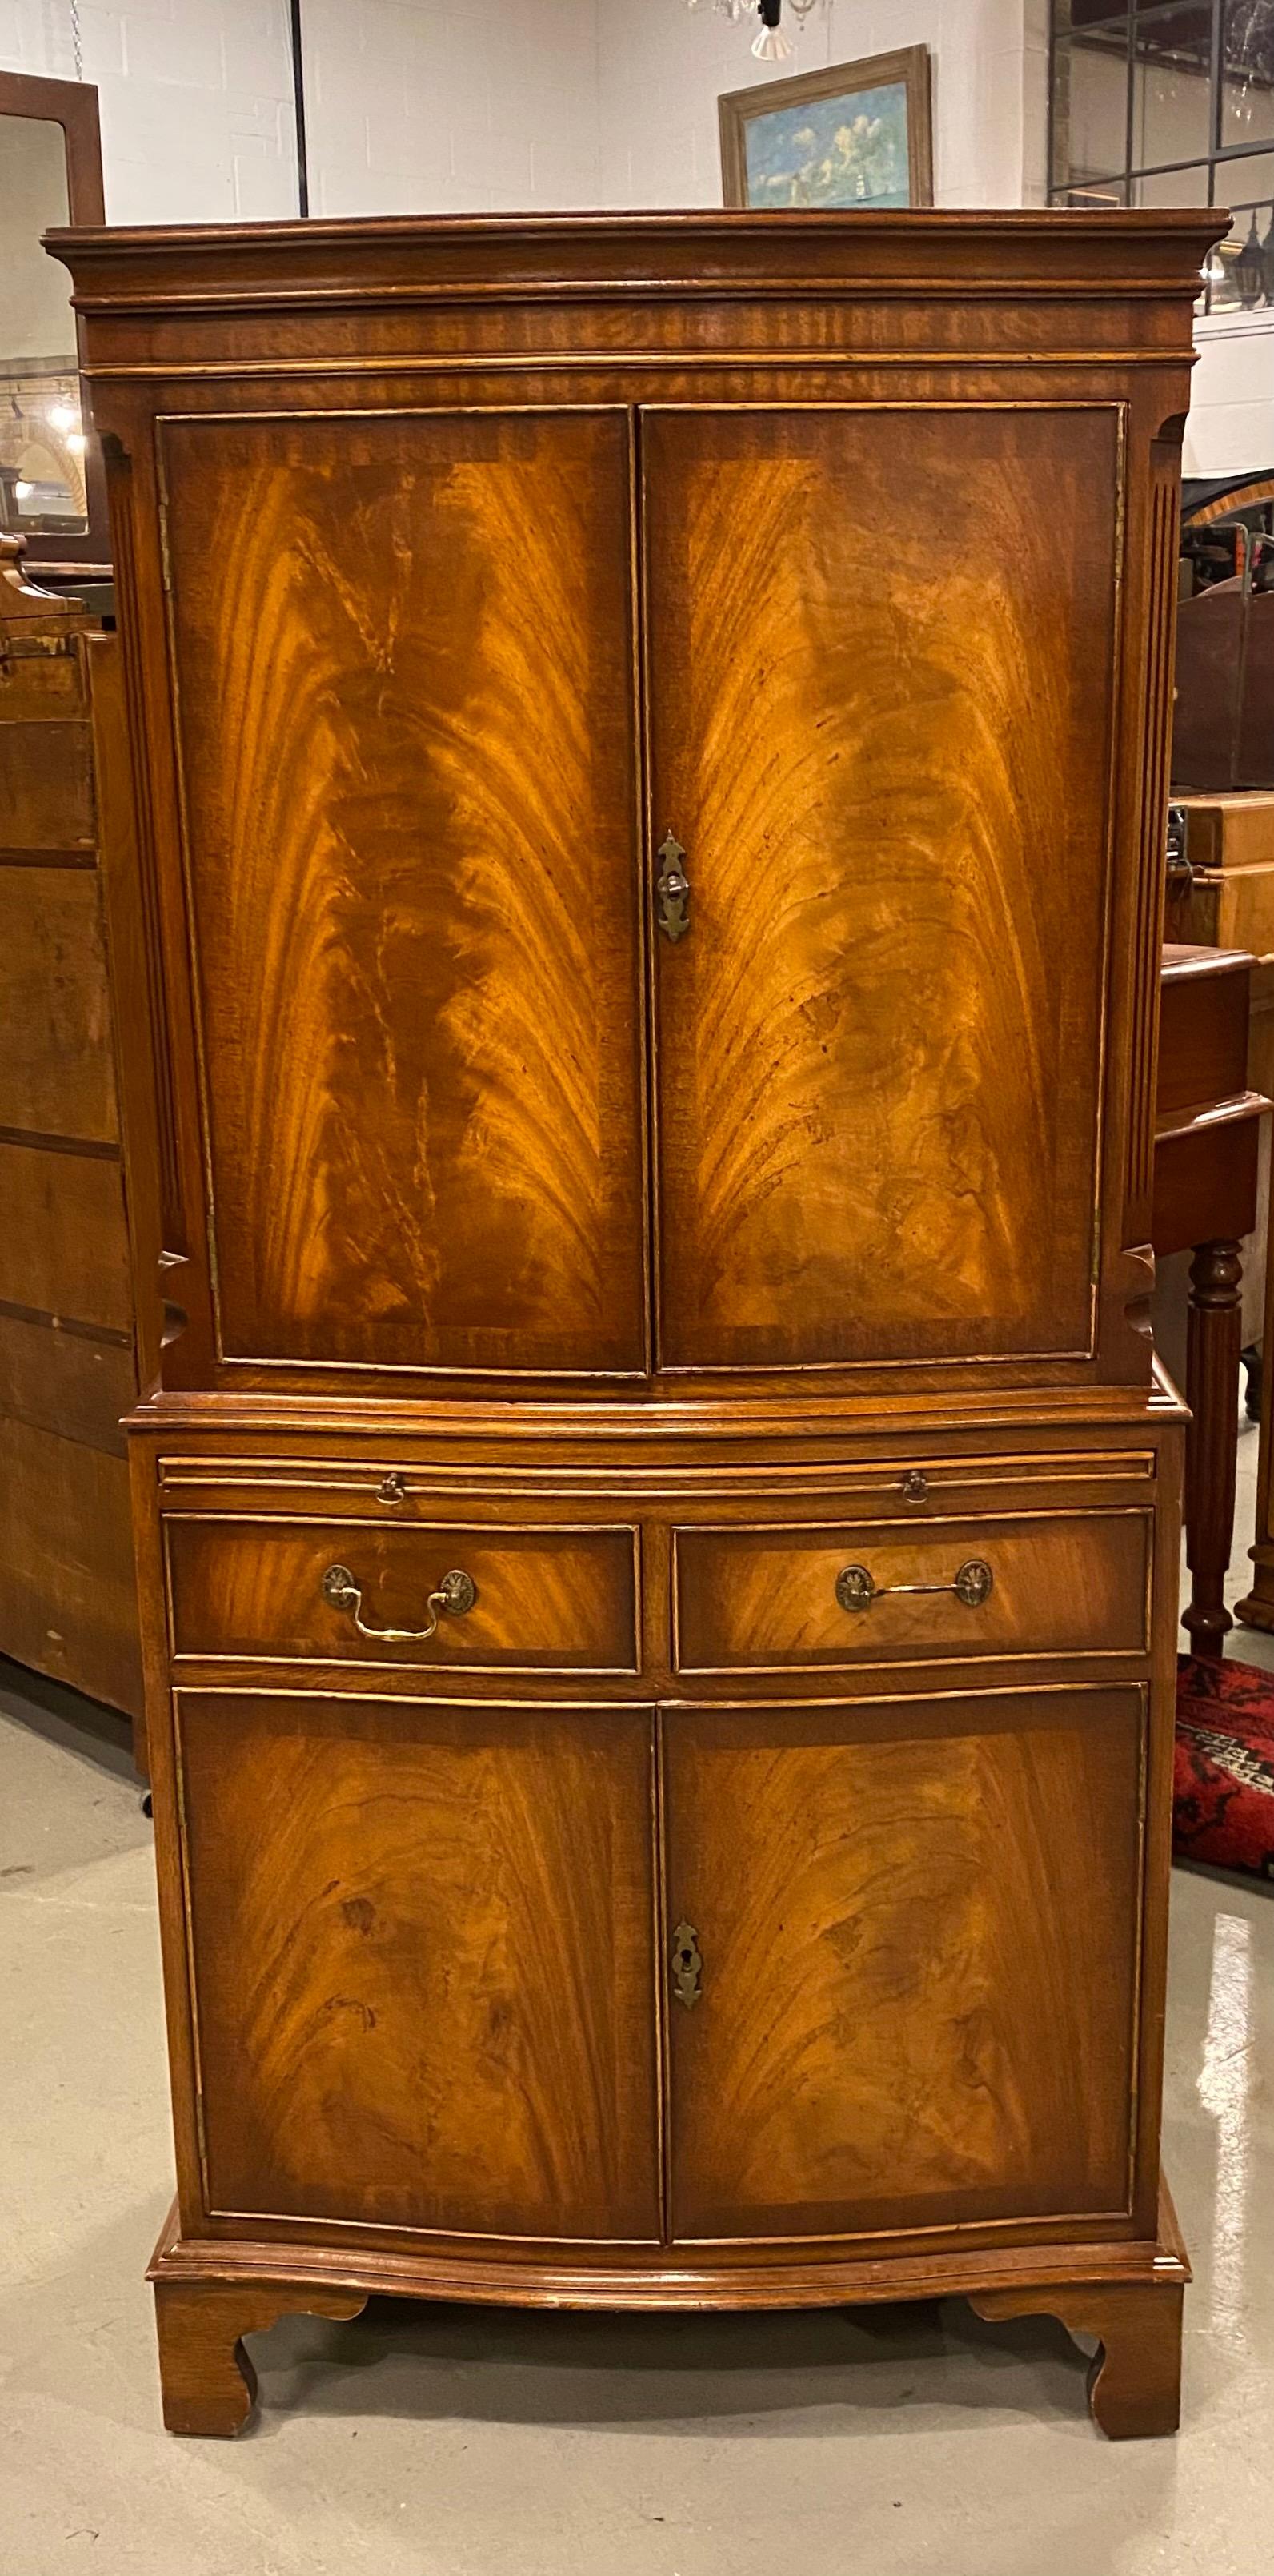 A mahogany dry bar or drinks cabinet crafted in mahogany, Georgian styled with a delicate serpentine curve to the front to give it a classic line. Beautiful interior of mahogany with two shelves displays what needs to be displayed. The pull out